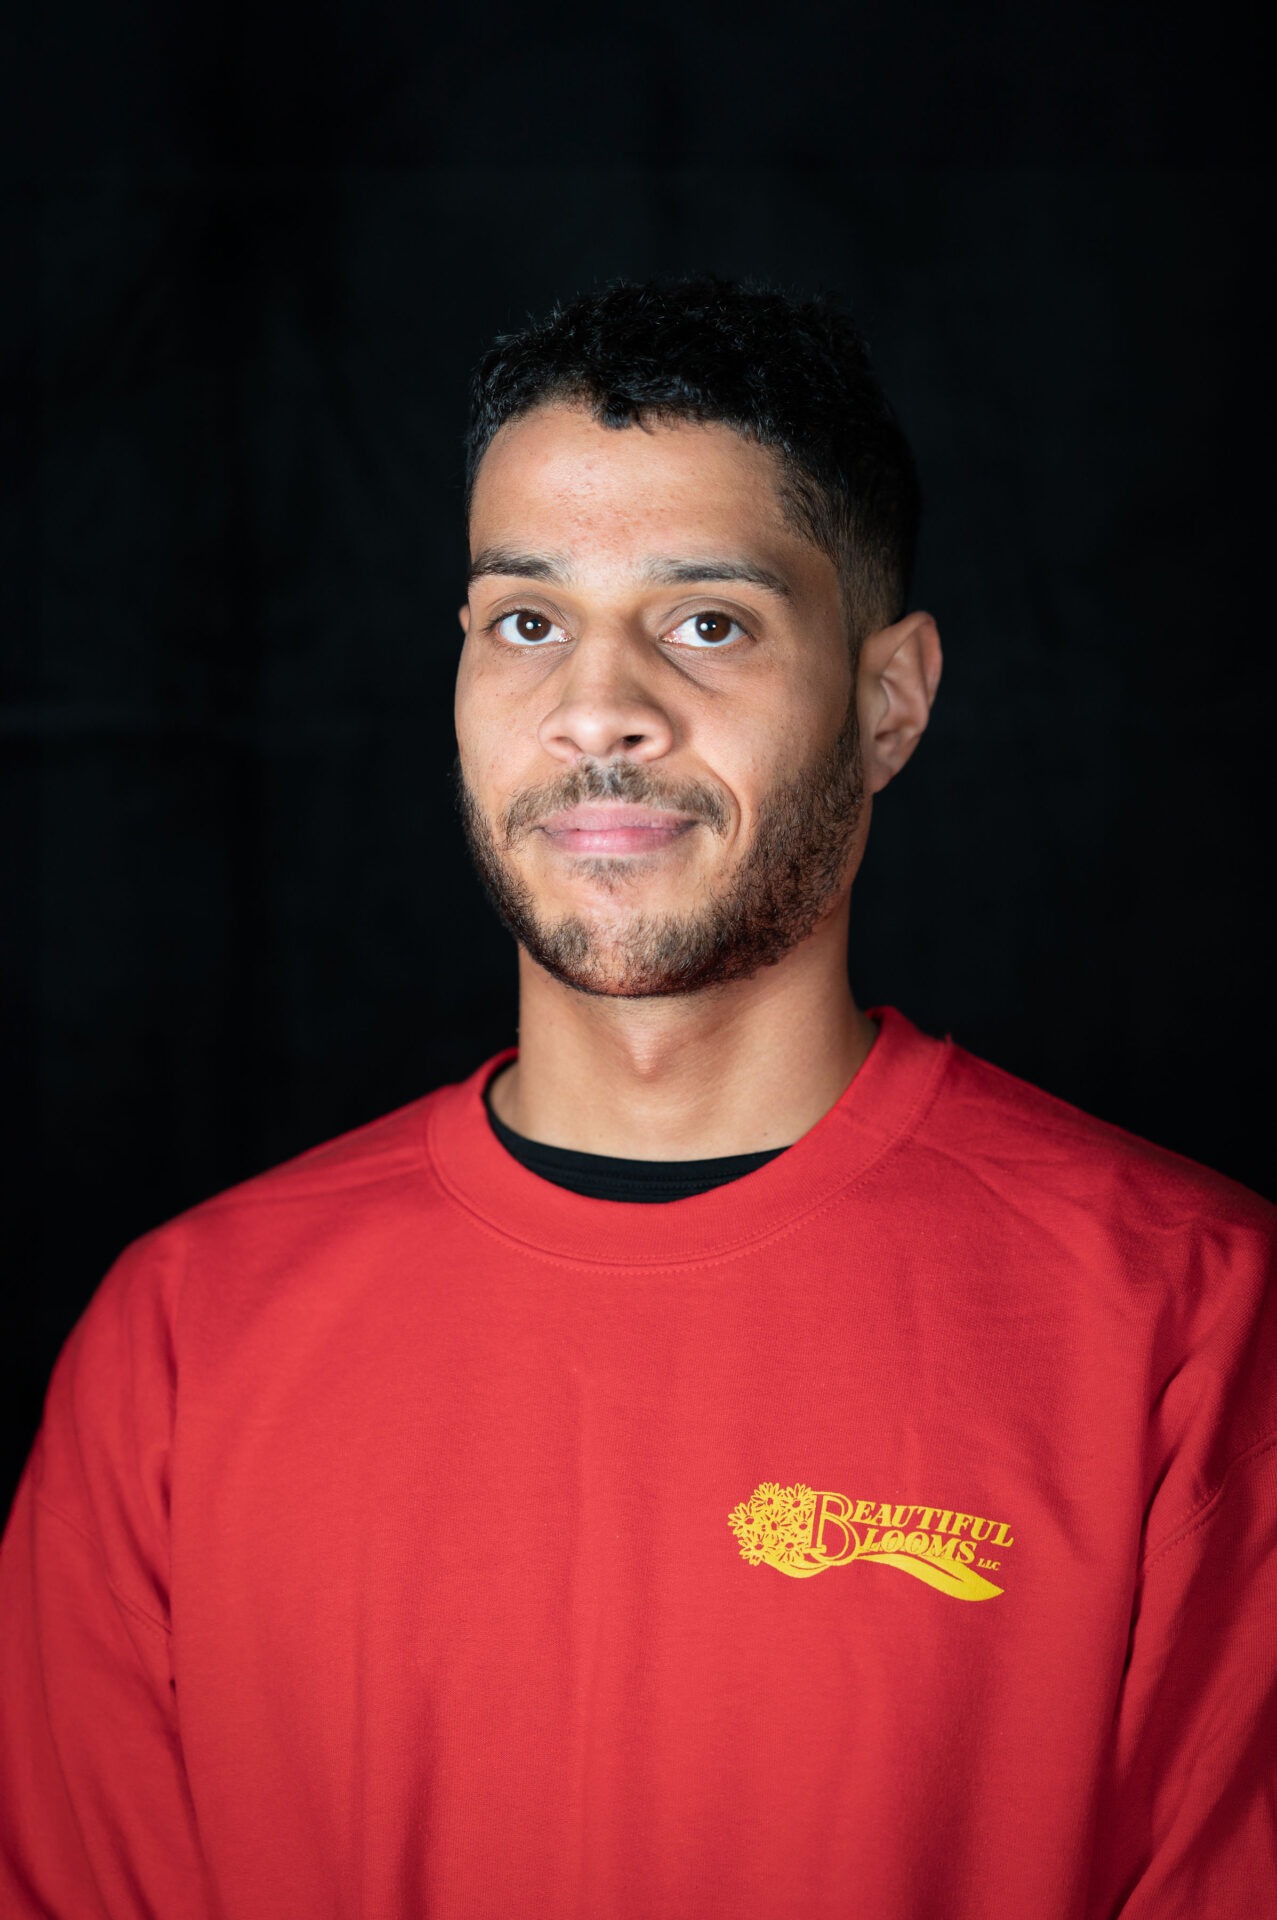 A person with short hair stands against a black backdrop, wearing a red t-shirt with "Beautiful Blooms" printed on it, looking directly at the camera.